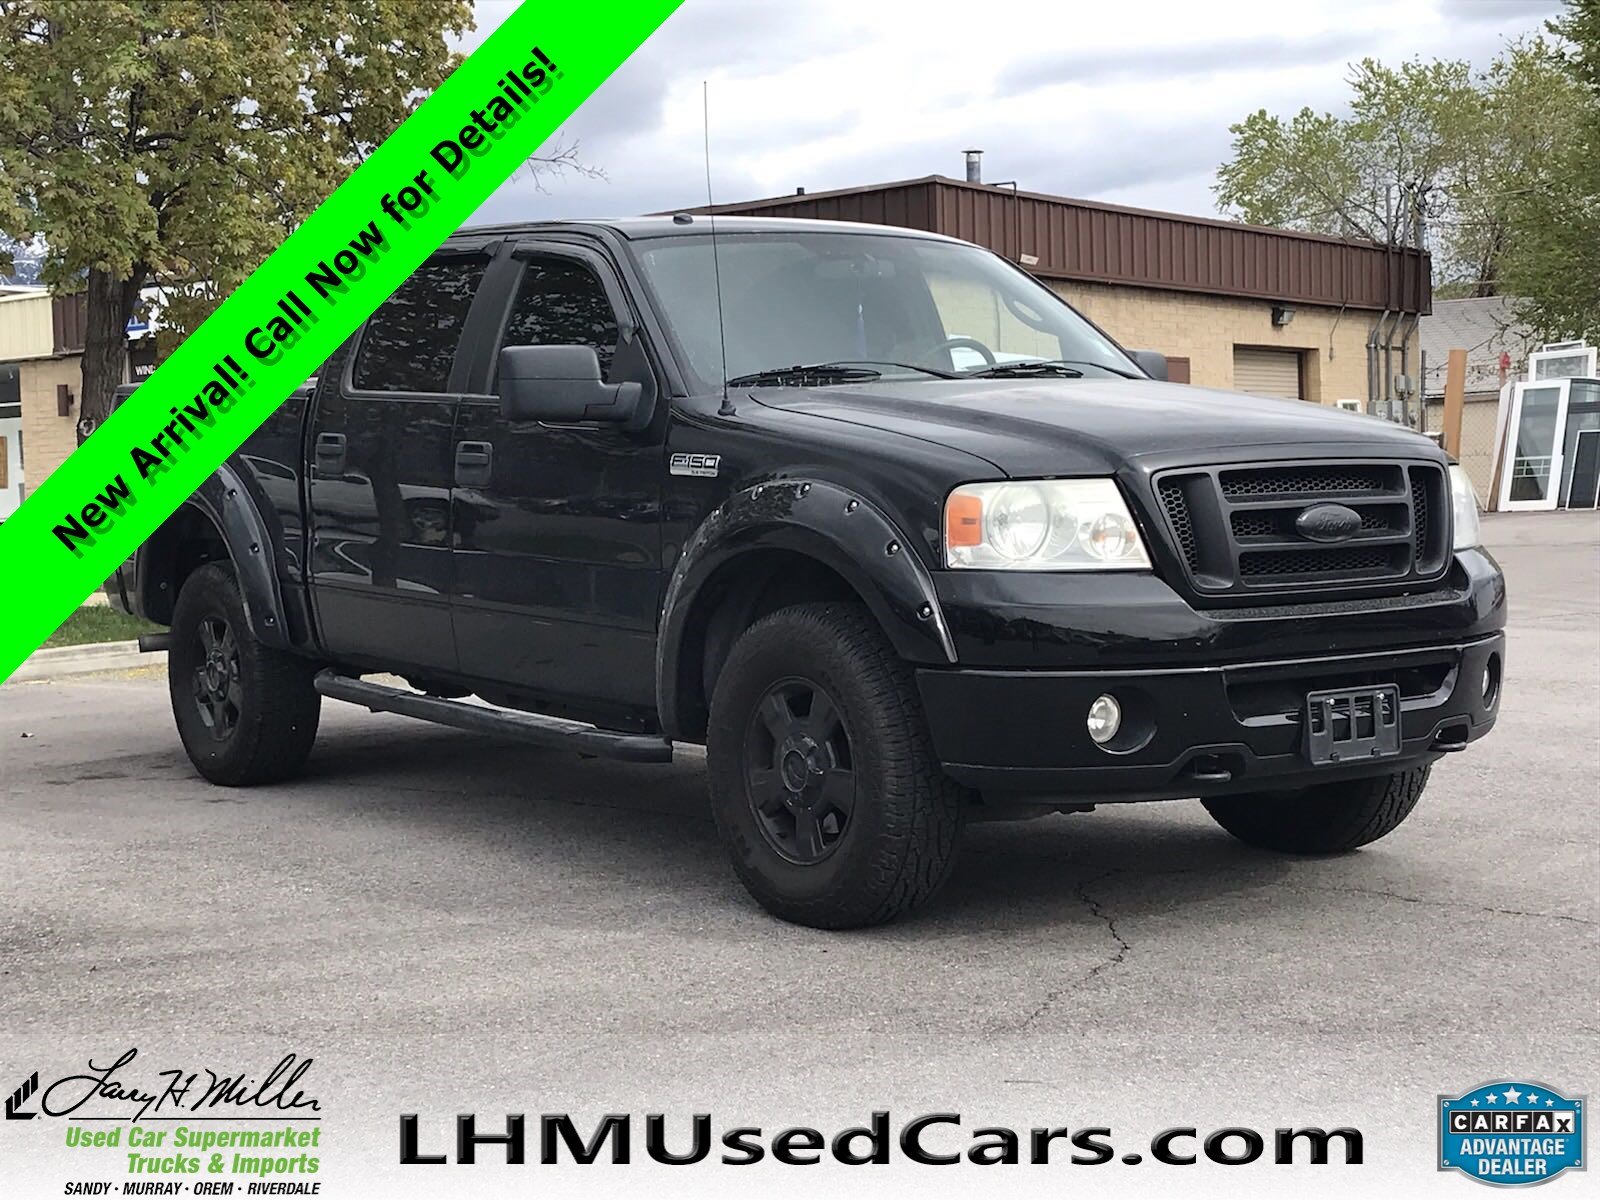 Pre-Owned 2008 Ford F-150 Crew Cab Pickup in Orem #S6180B 2008 Ford F150 4.2 V6 Towing Capacity